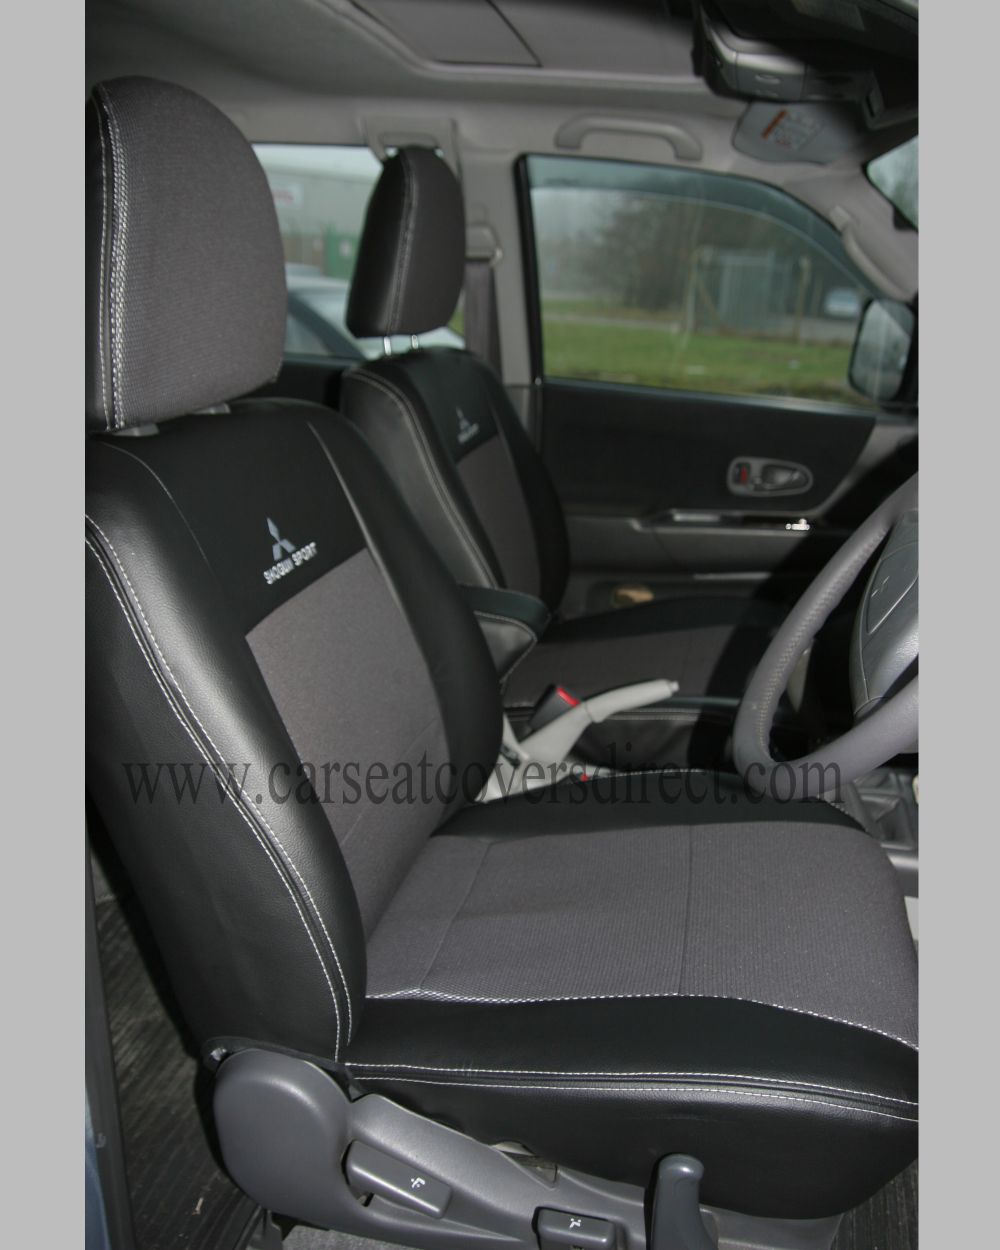 UKB4C Black/Grey Front Pair of Car Seat Covers for Saab 9-3 93 All Models 